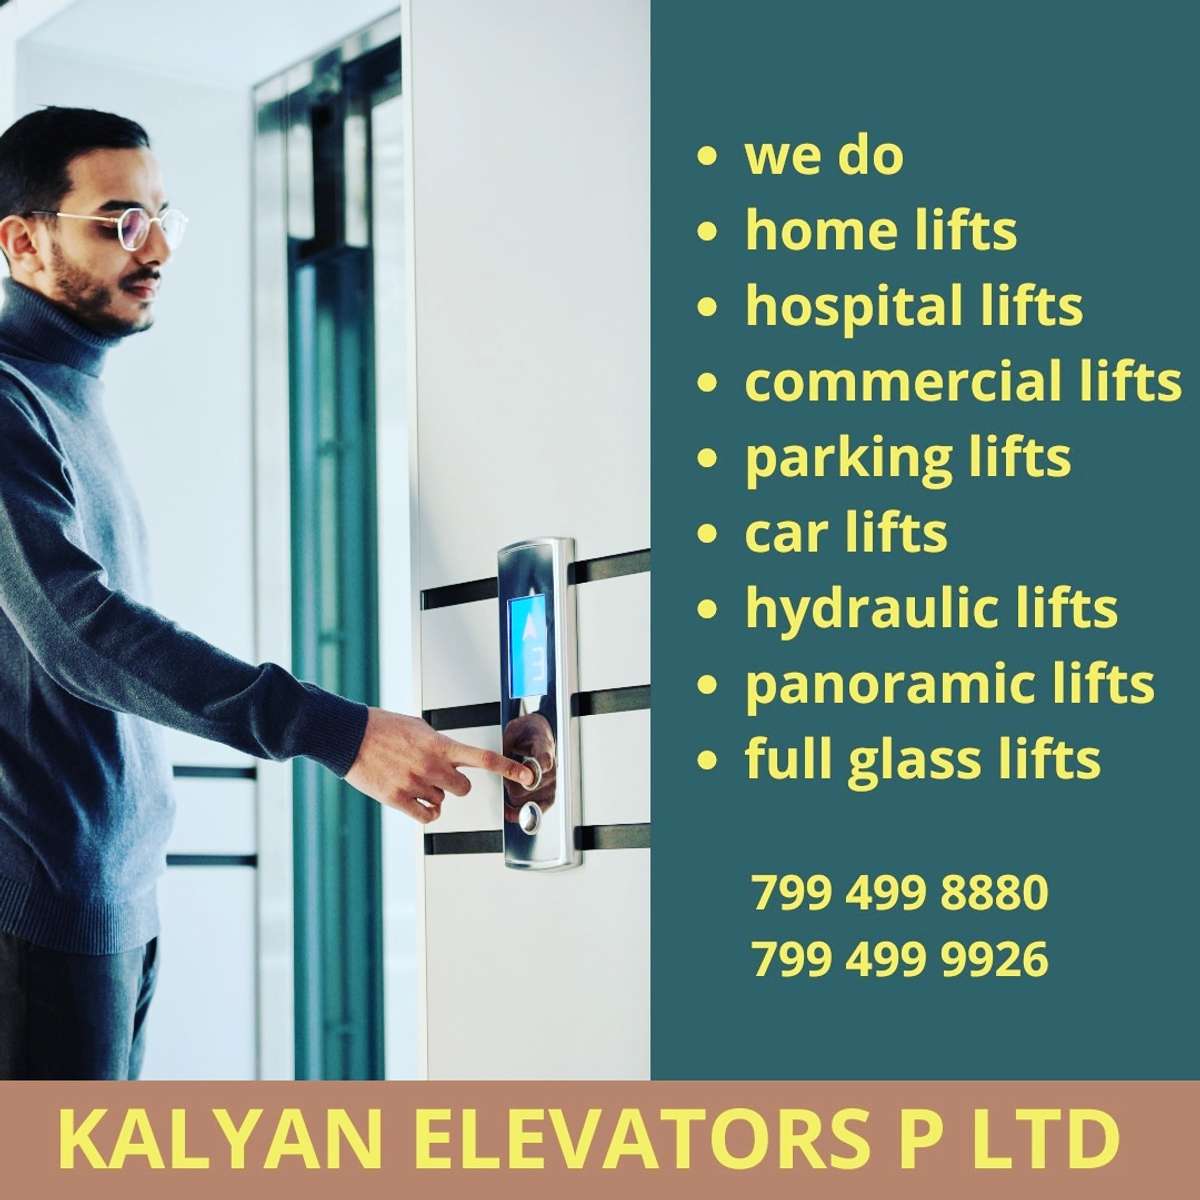 Kalyan Home Elevators offers the long-awaited solution to vertical mobility within homes at affordable prices and easy-to-use features. Our customized and aesthetically designed home lifts are easily installable in preexisting homes as well as houses under construction, and help you relieve the headache of climbing. More details:- contact us:-

we do all kind of :-
Home Lifts
Hospital Lifts
Capsule Lifts
Commercial Lifts
Customised Passenger Lifts
Car Lifts
Parking Lifts